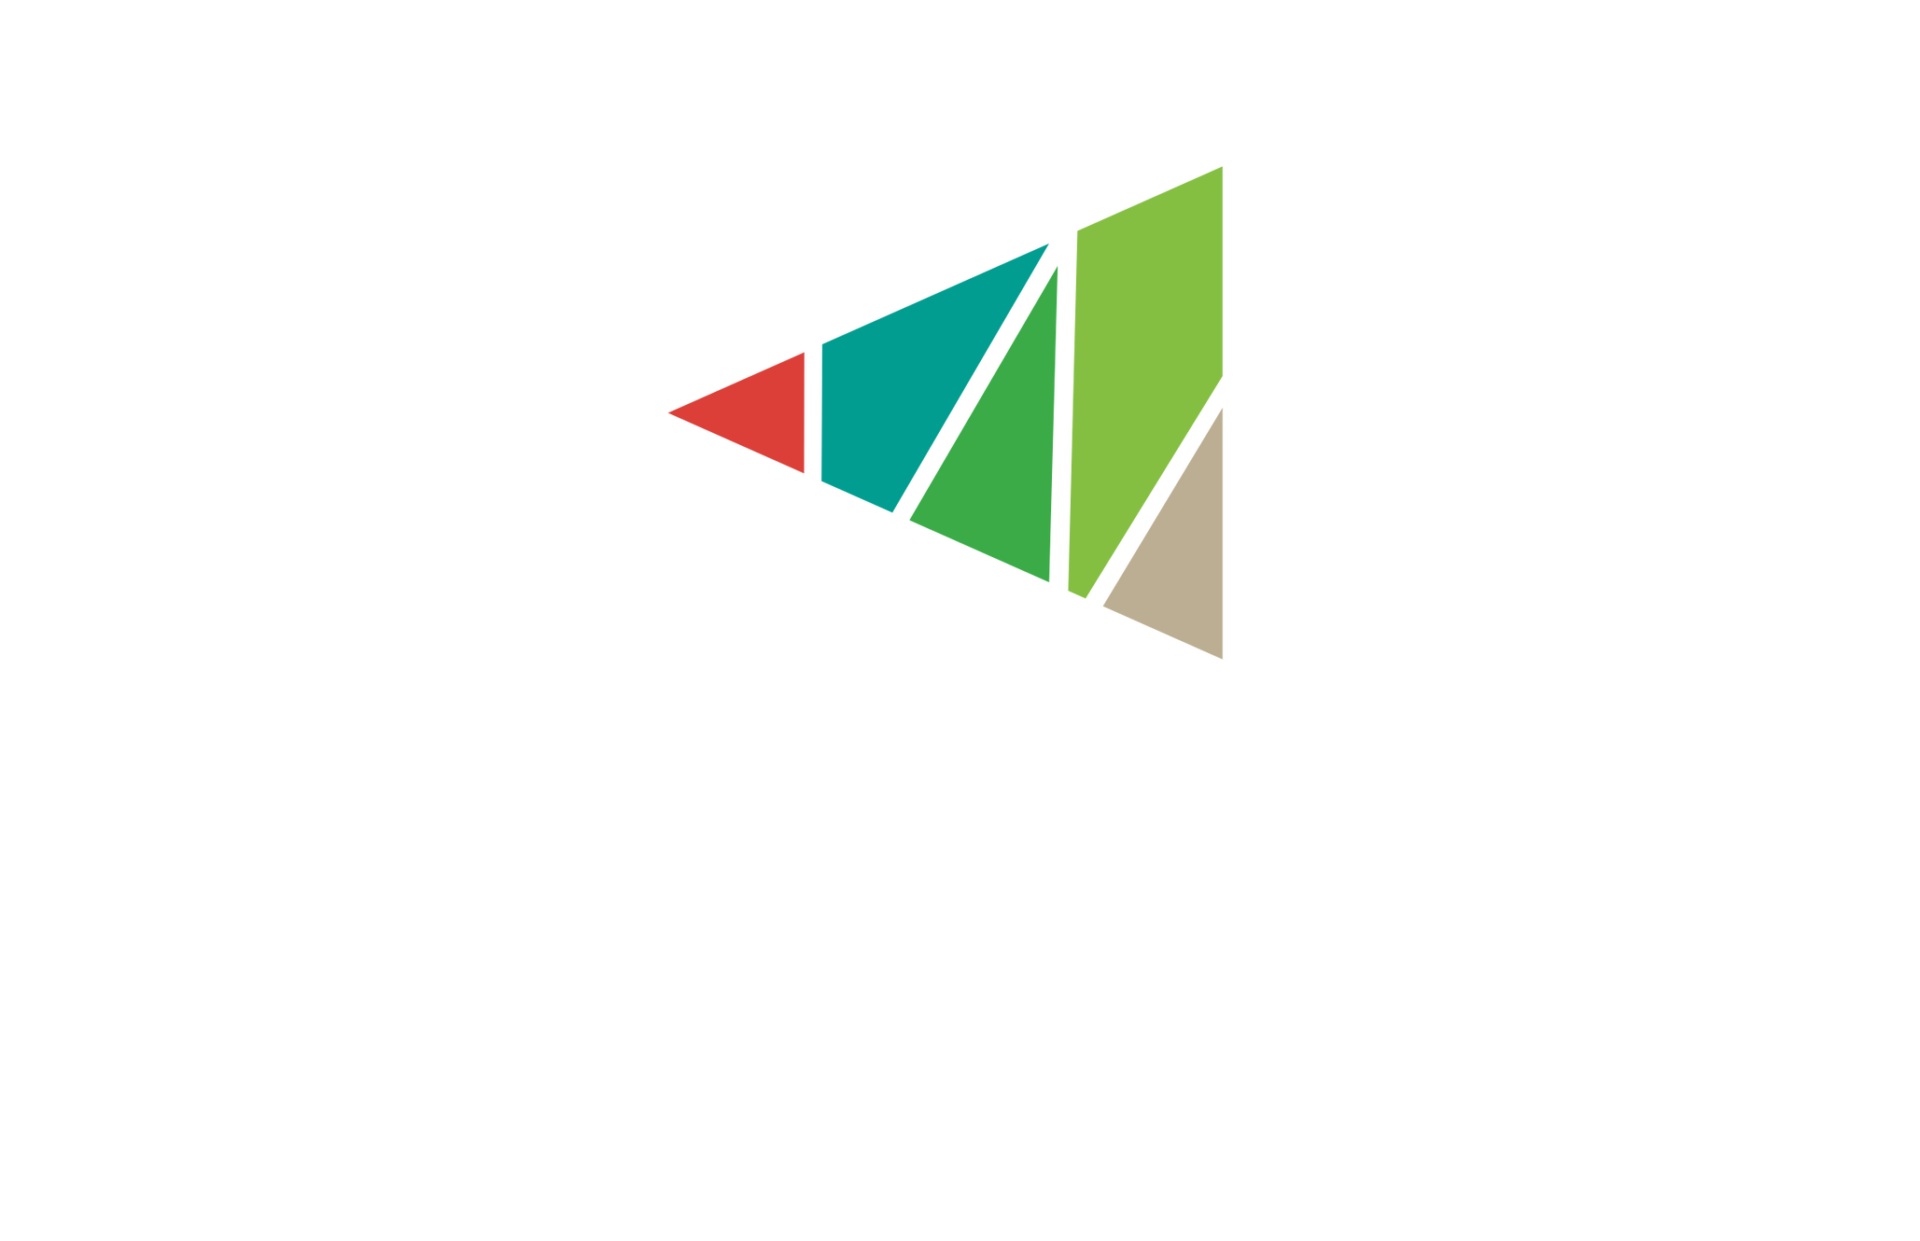 The Club at Westlinks